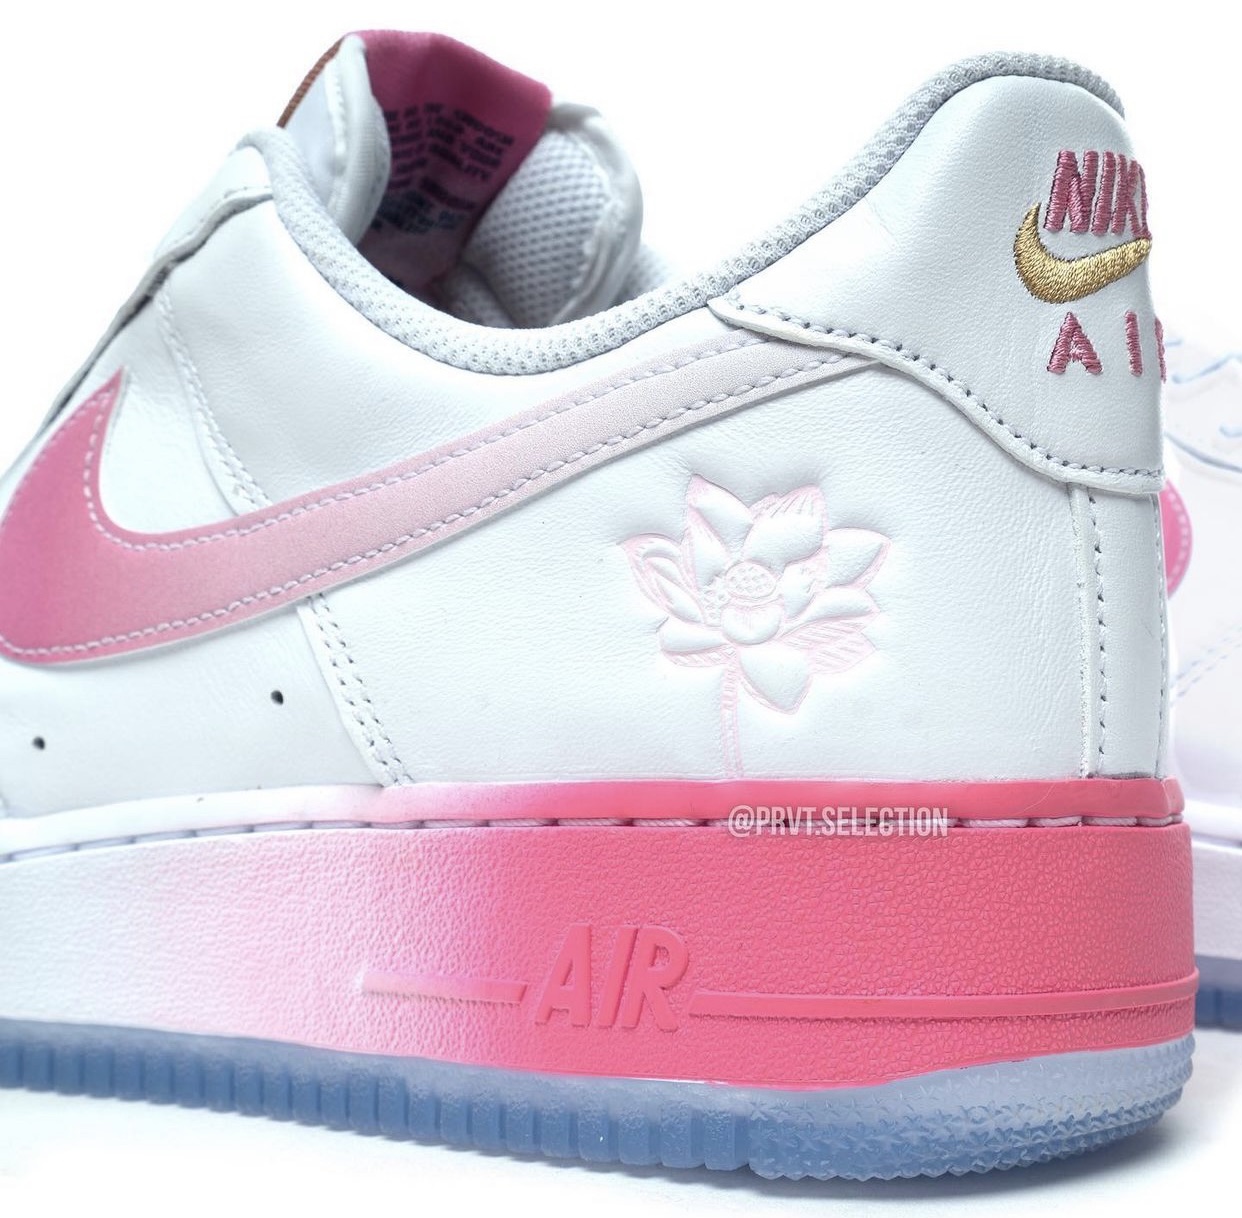 Nike Air Force 1 Low San Francisco Chinatown Release Date Info